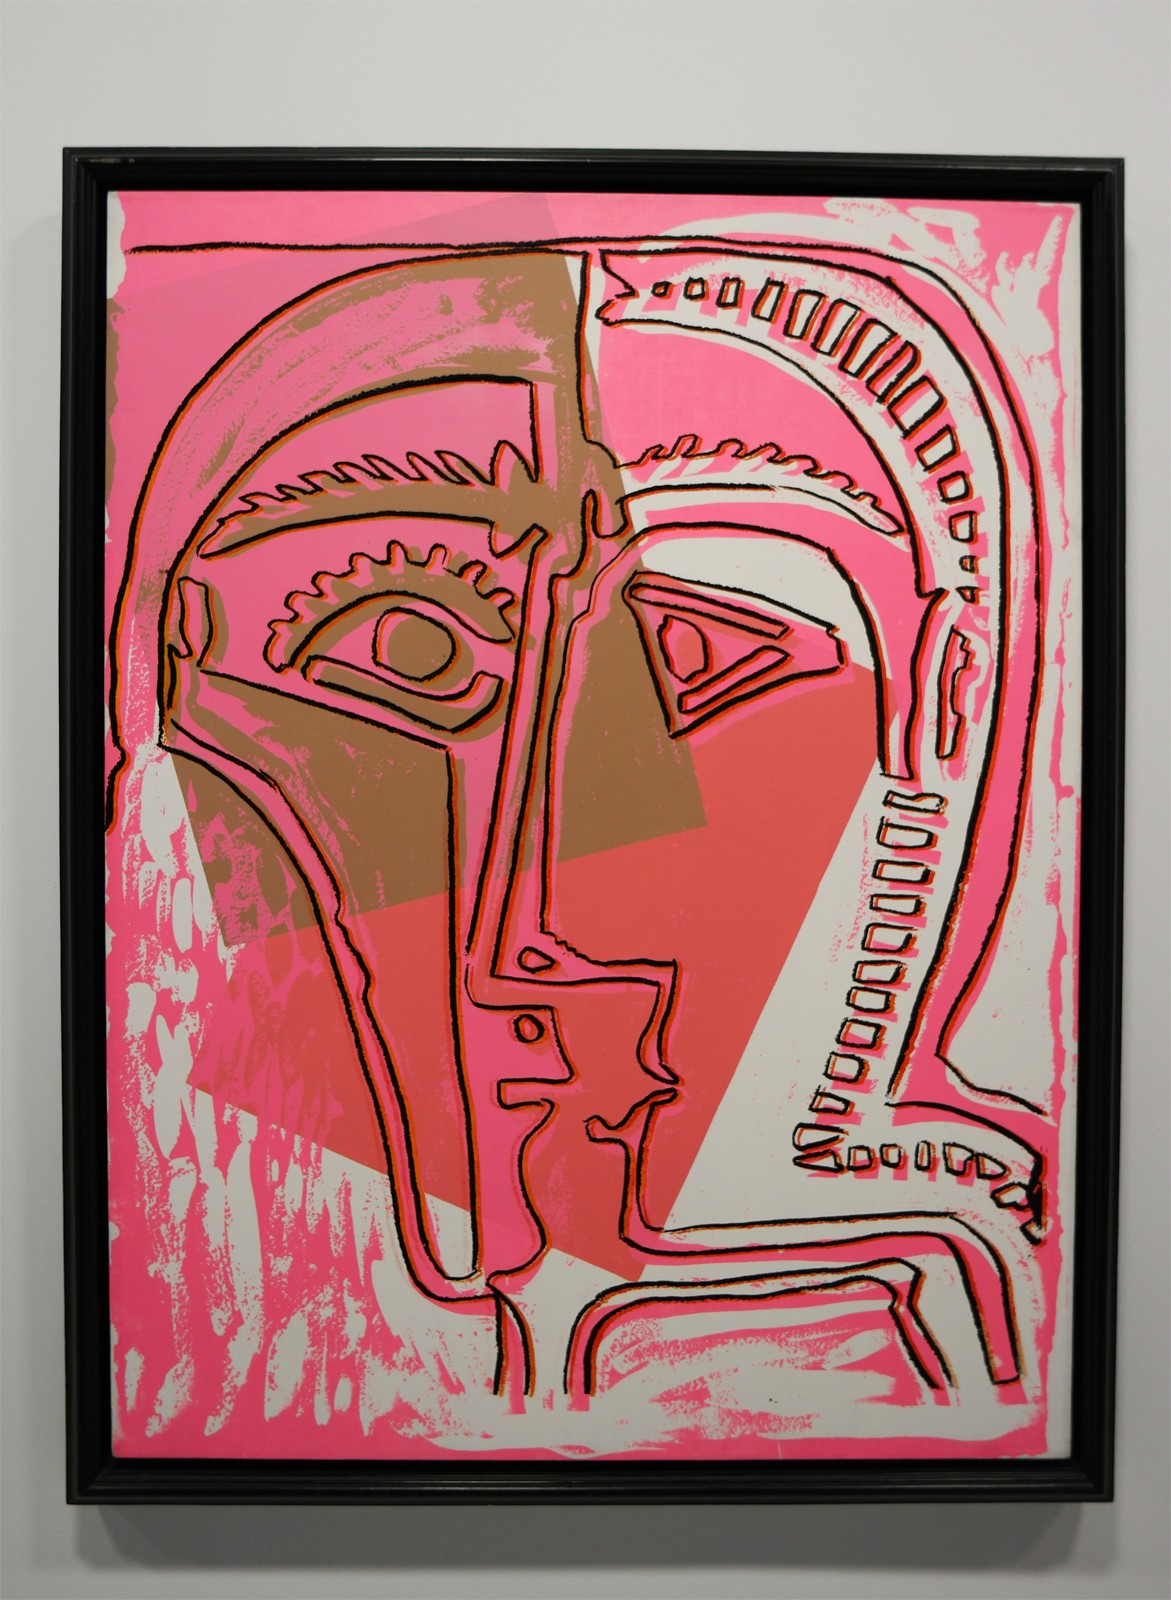 Head (after Picasso), 1985, Andy Warhol